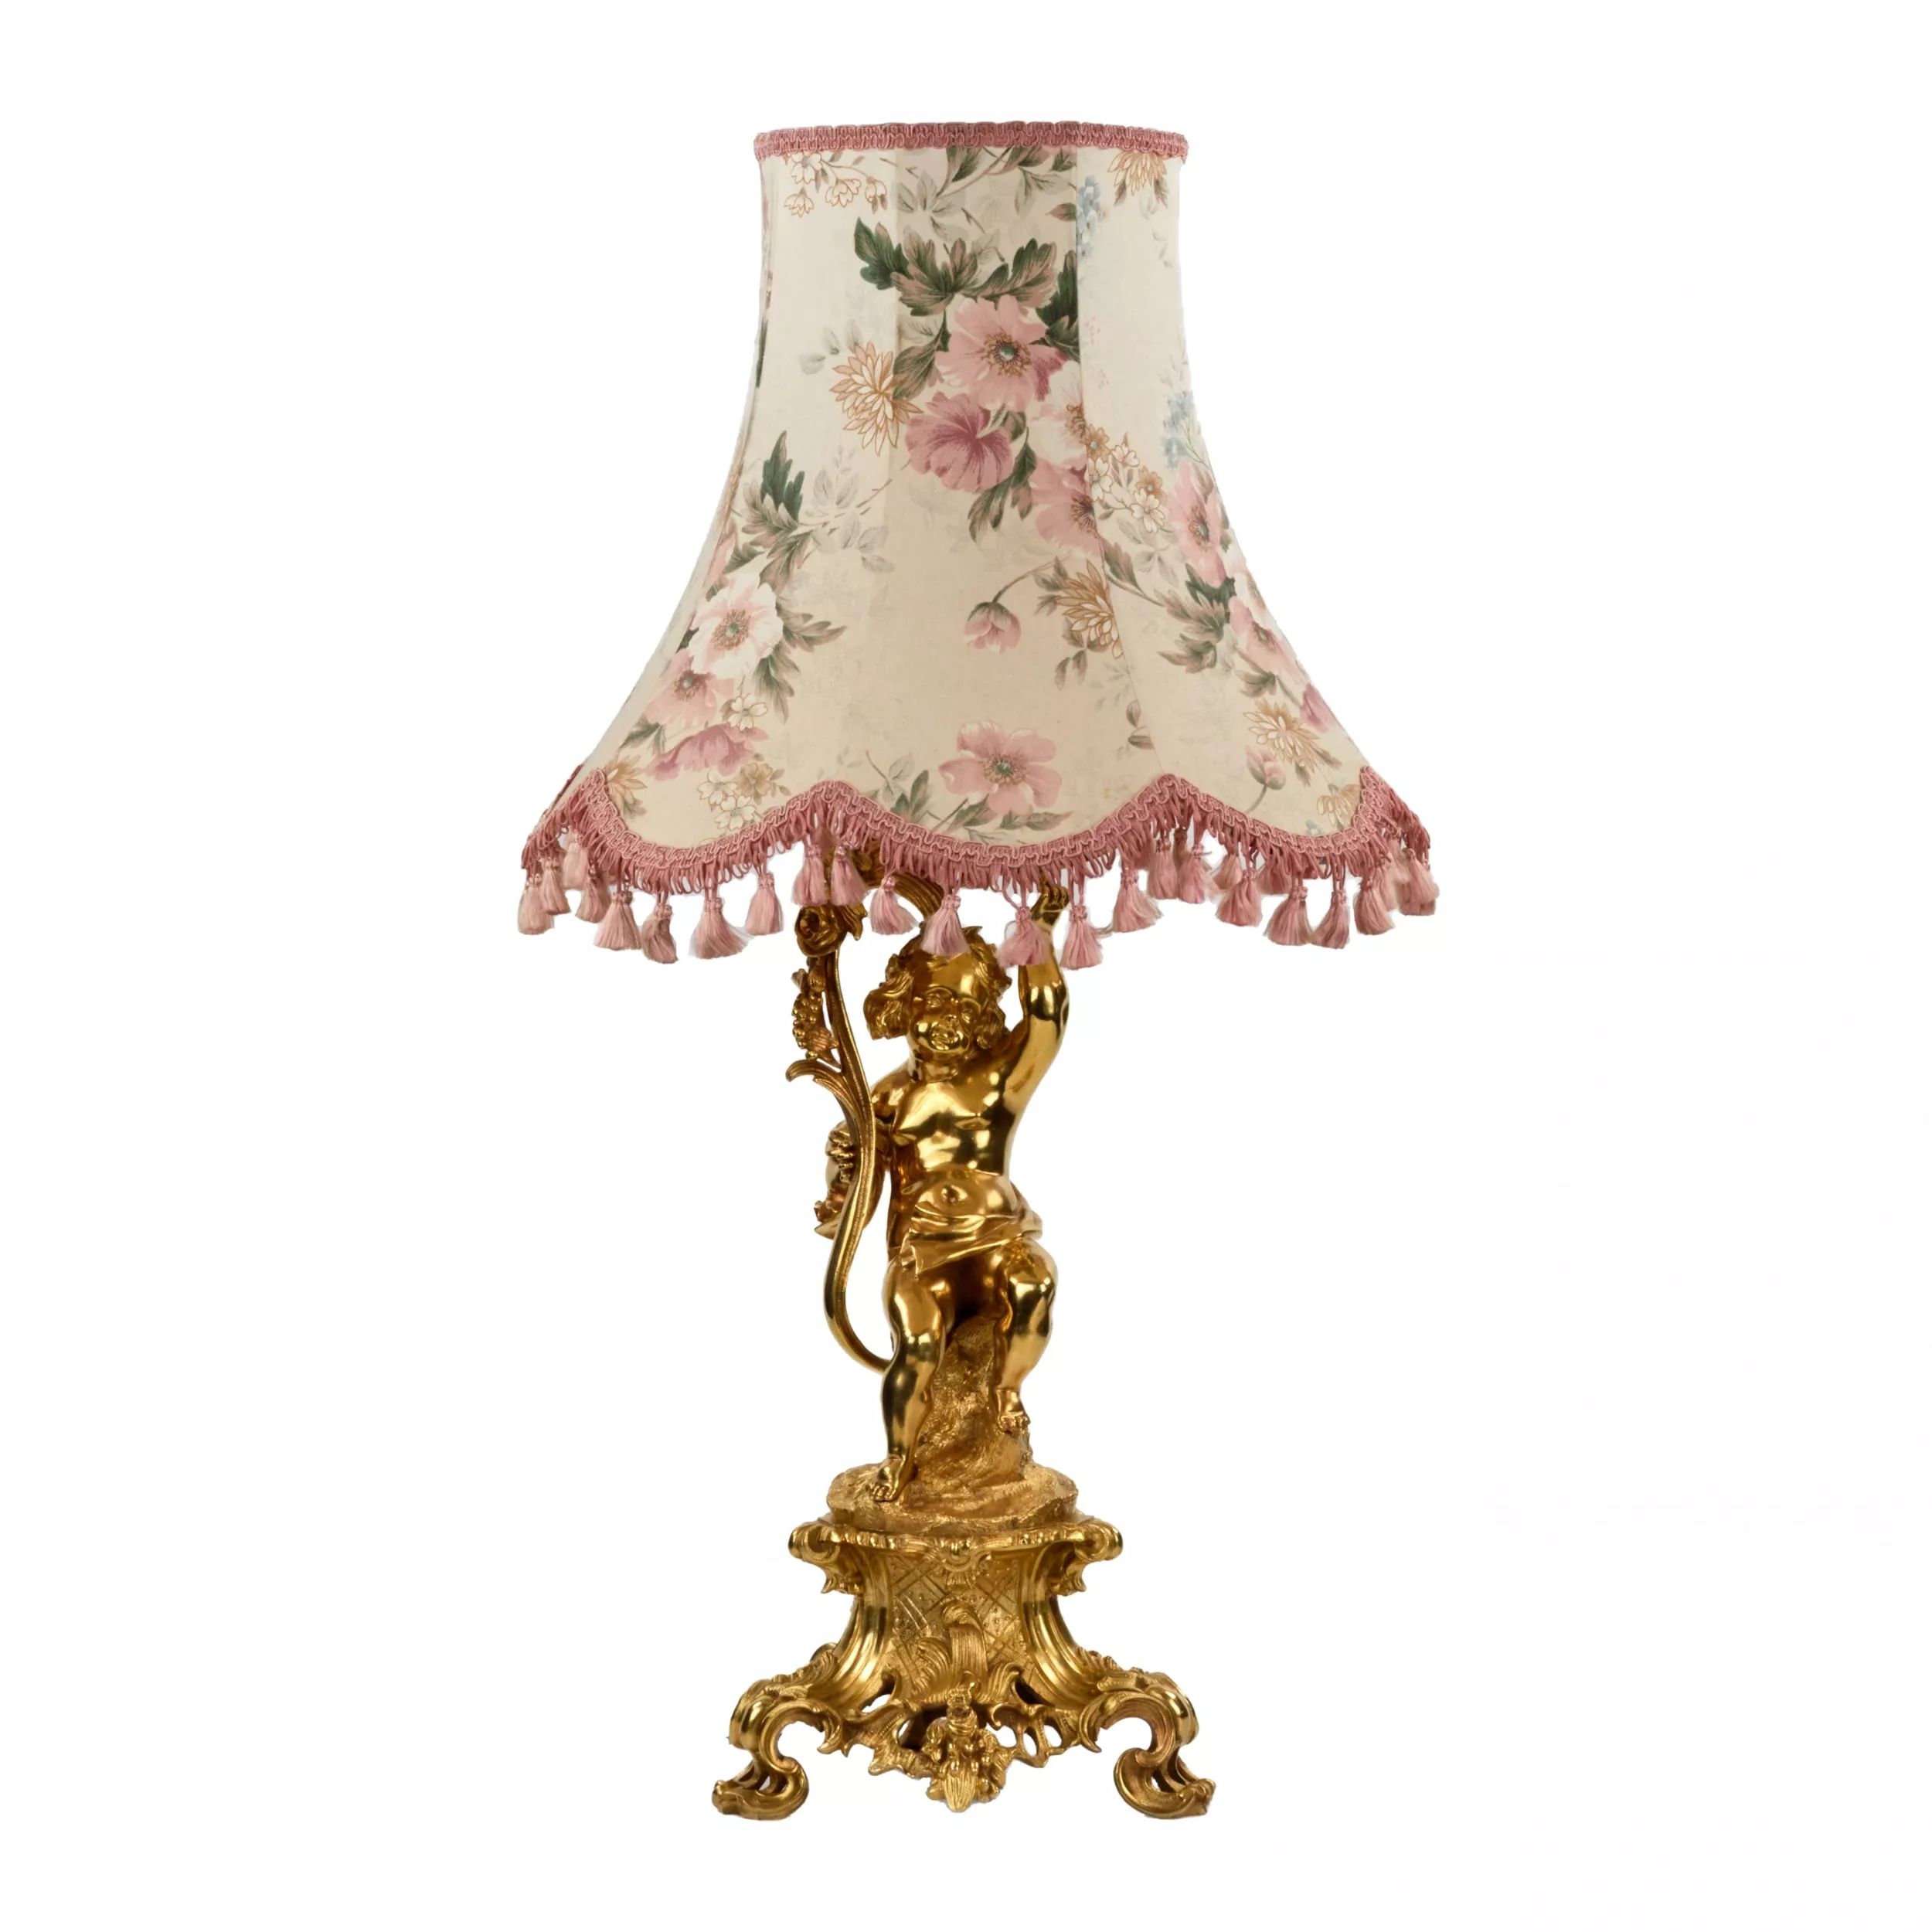 Gilded-bronze-lamp-in-the-neo-rococo-style-